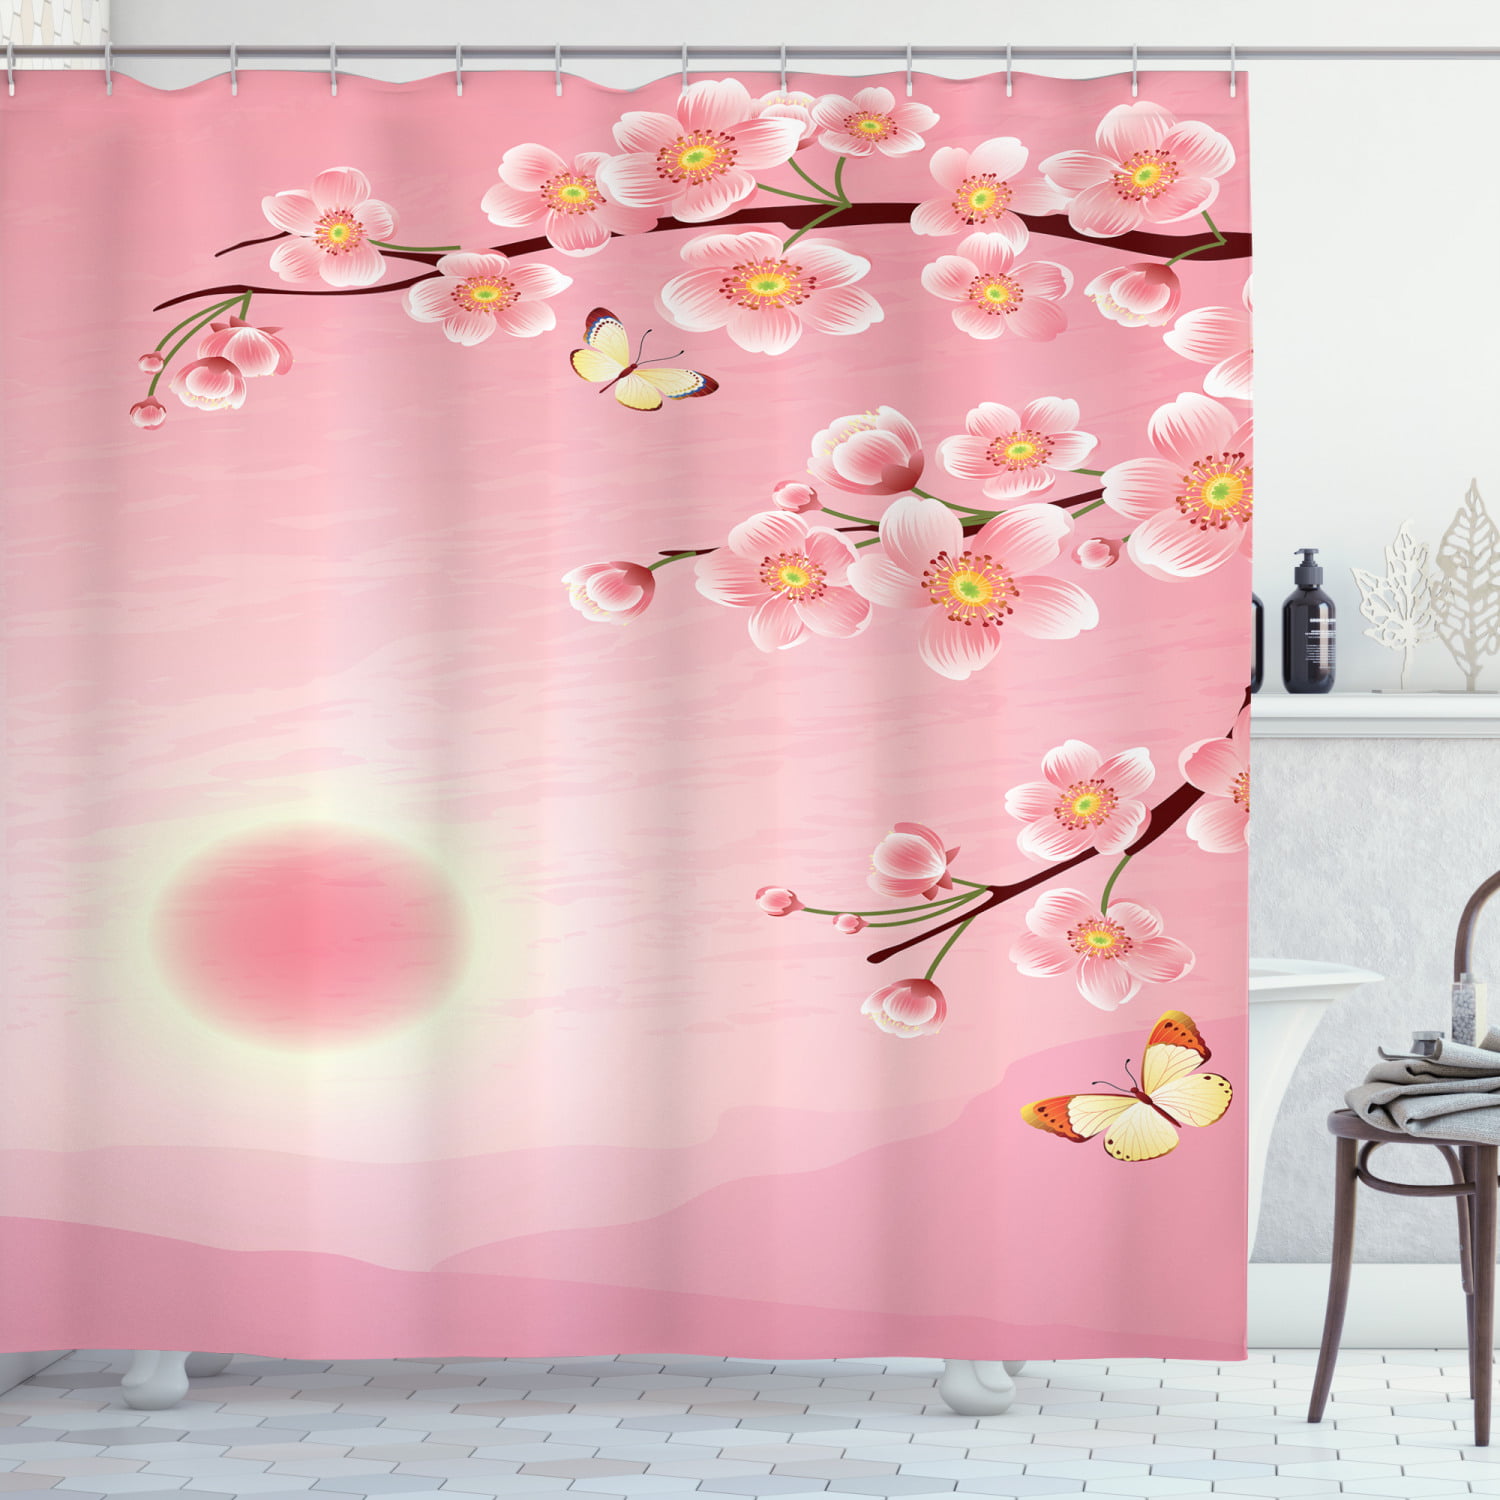 Floral Tree Against the Sunny Sky Shower Curtain Waterproof Fabric Bath Curtains 